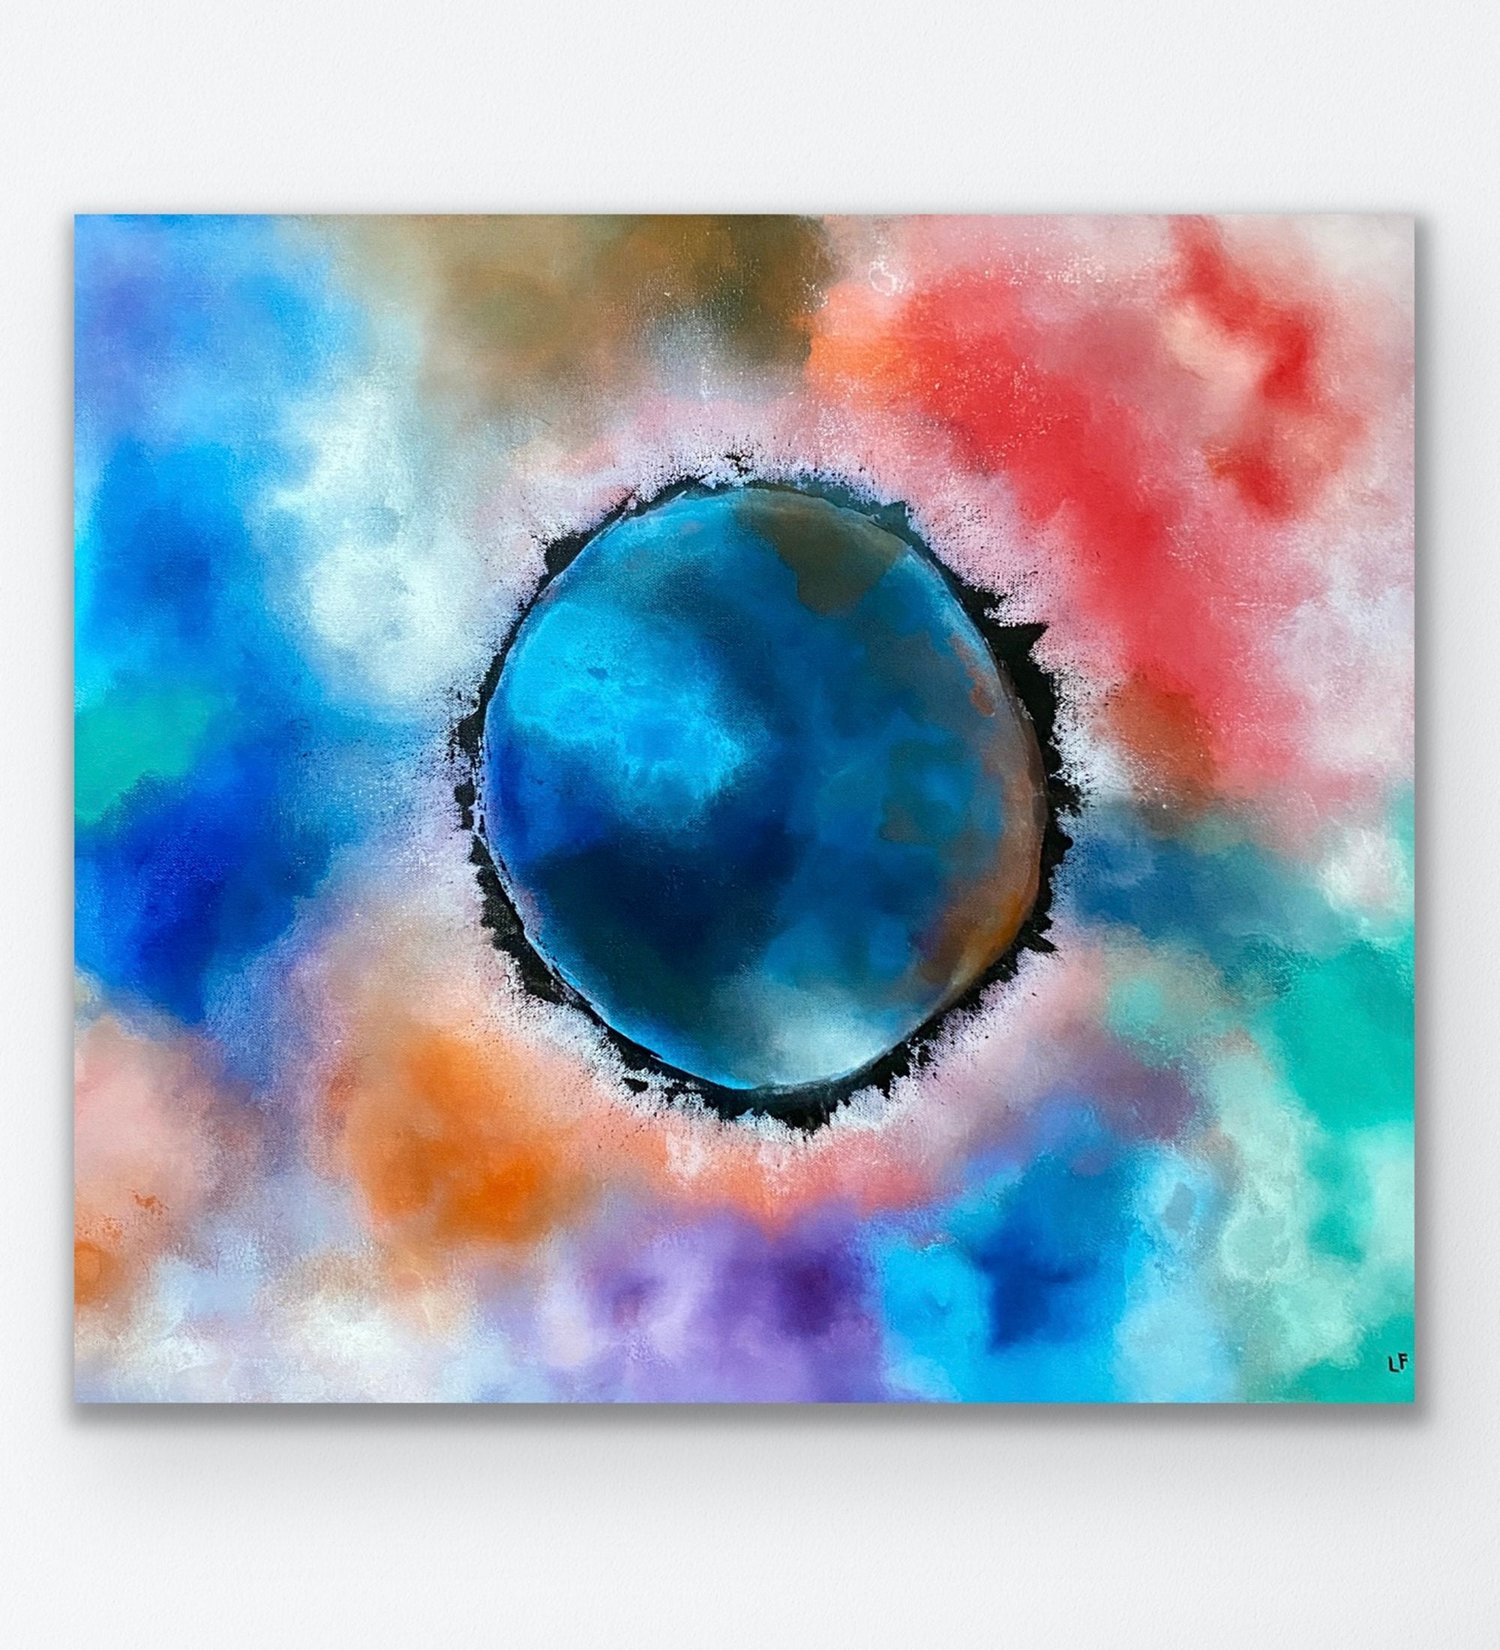 Canvas Wall Art Pictures, Circle Canvas Painting